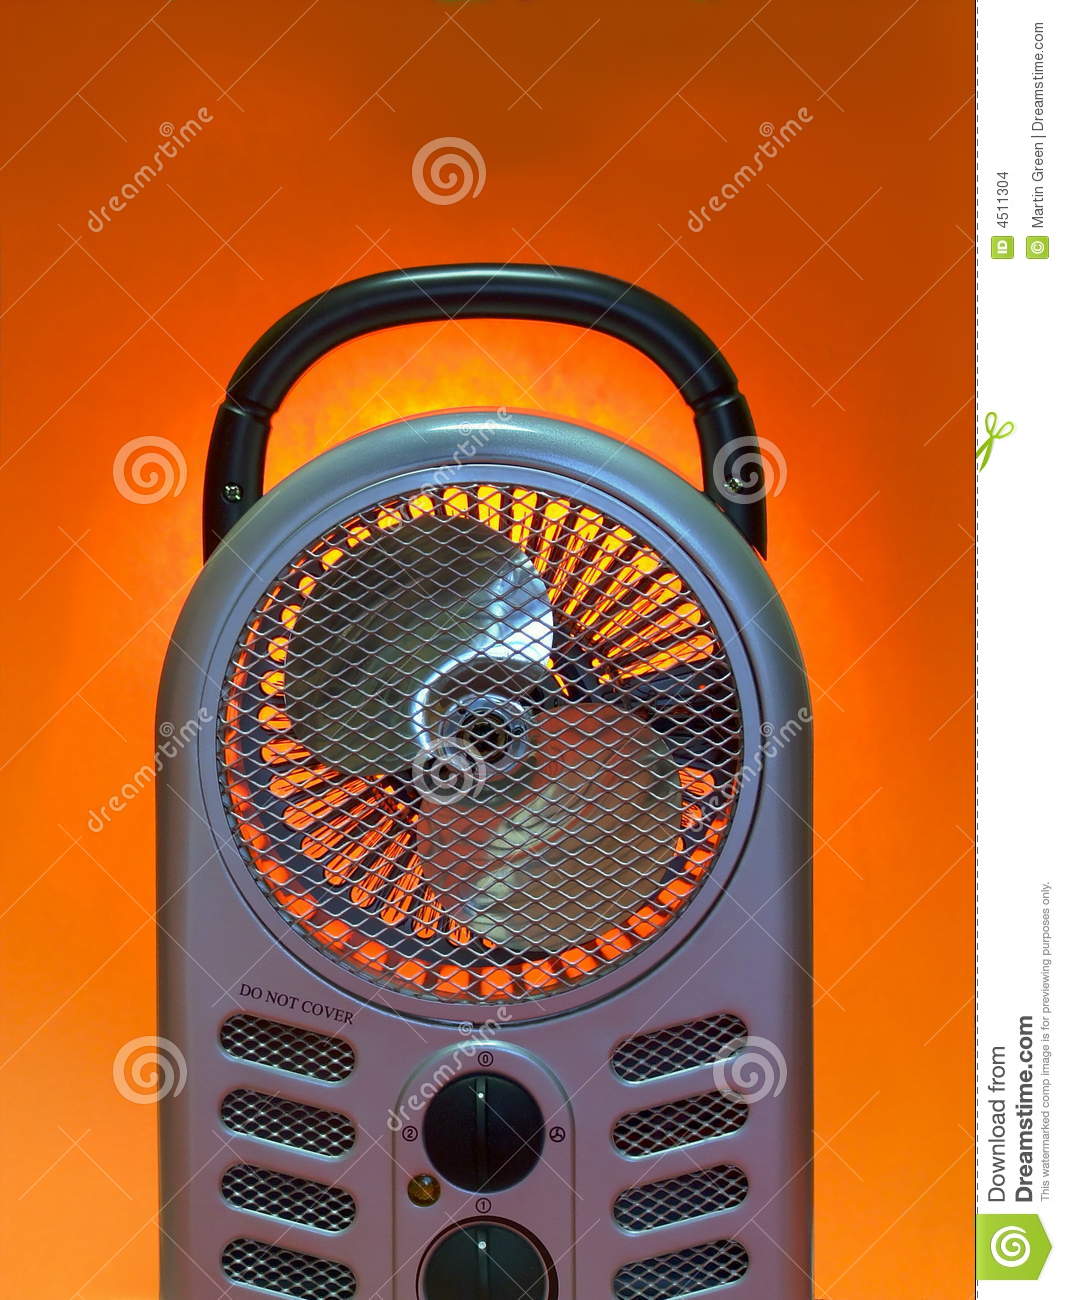 Portable Fan Heater Stock Images   Image  4511304